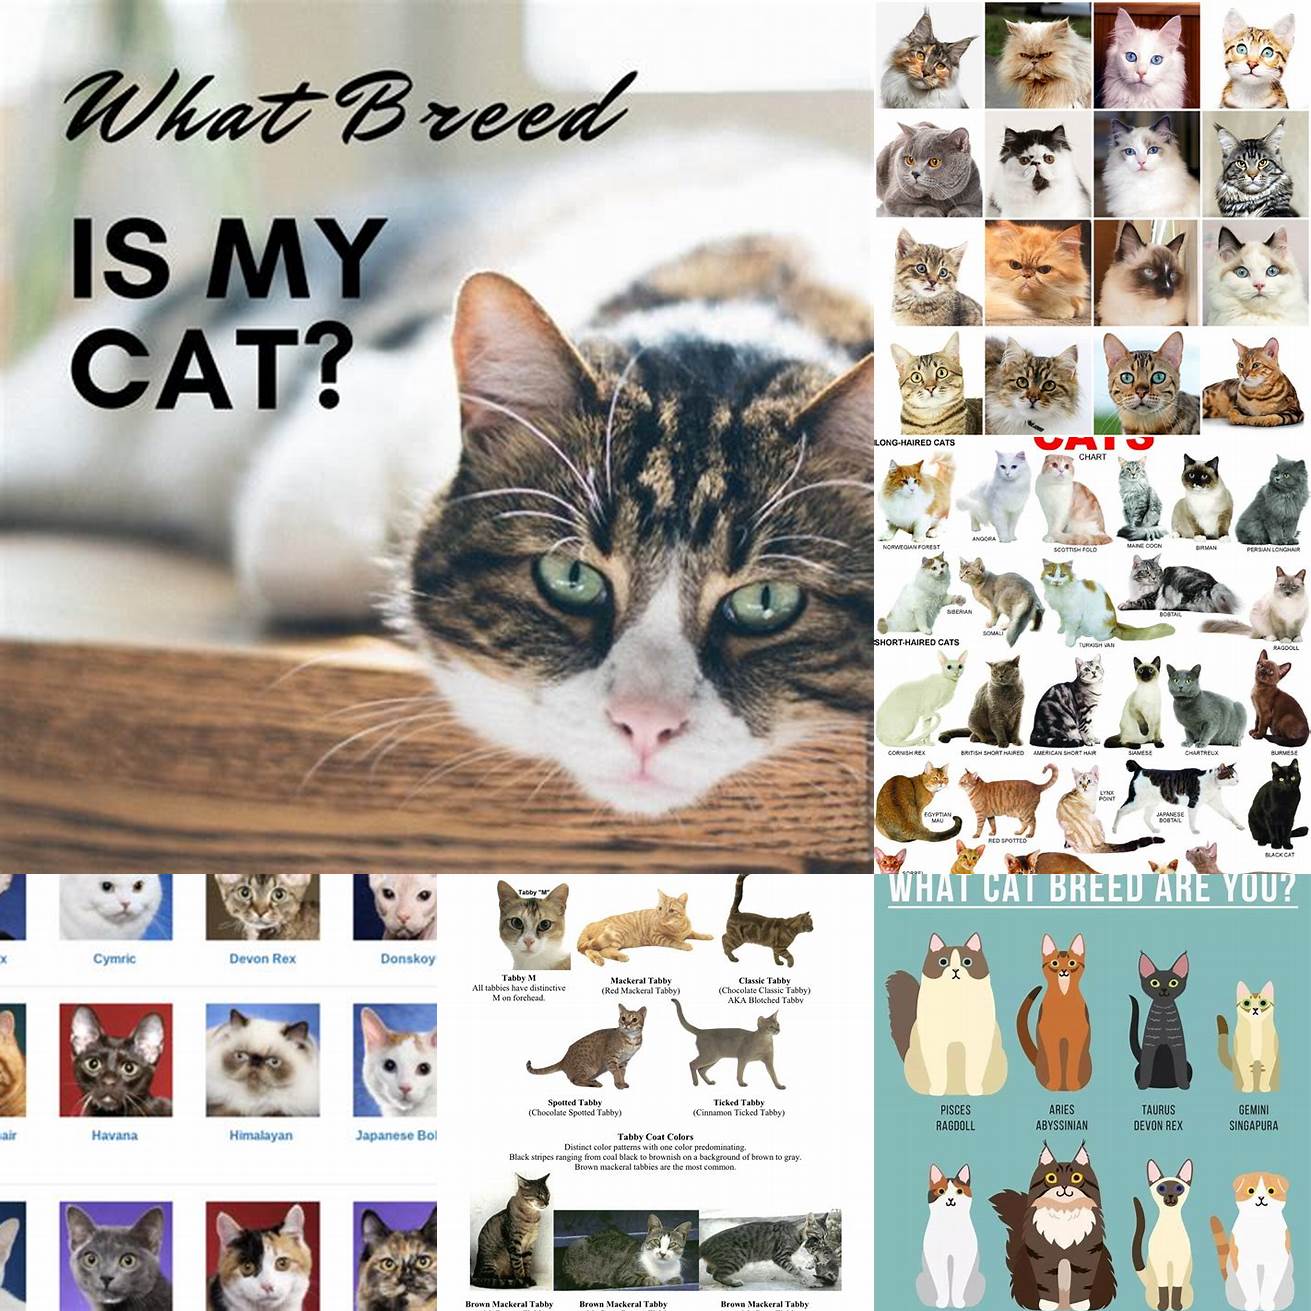 Curiosity You may be curious about your cats breed and want to know more about their ancestry